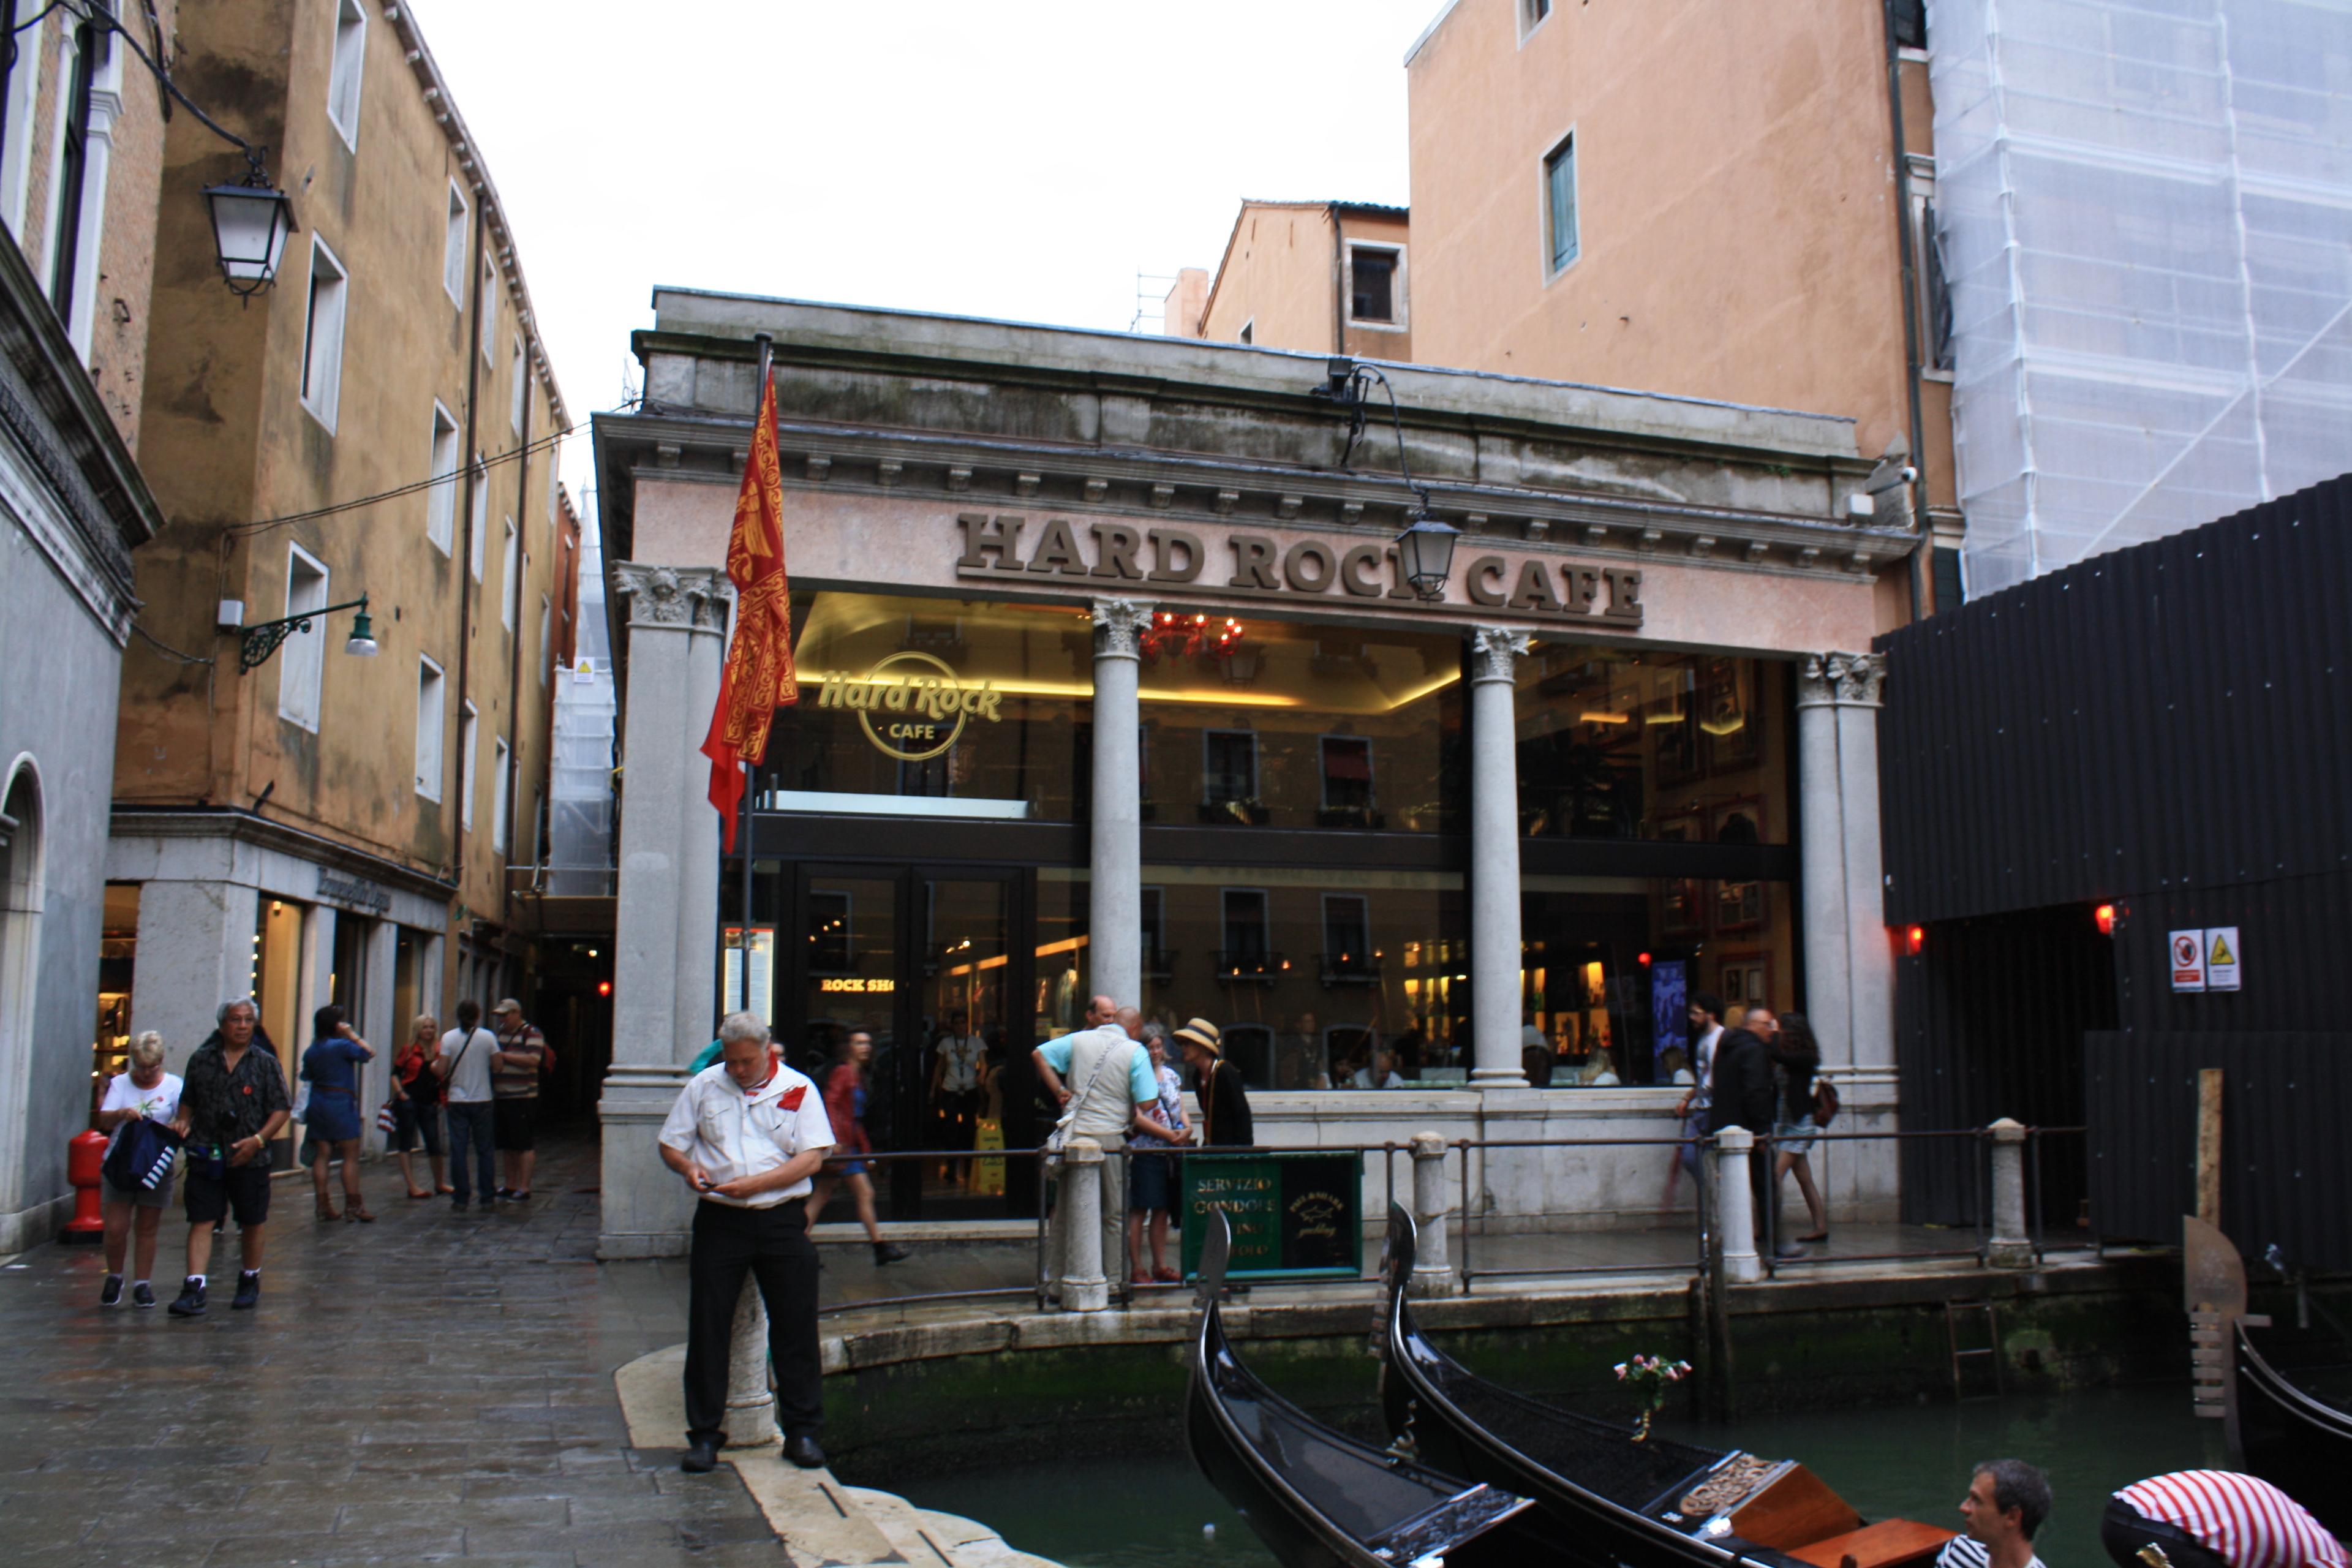 Cover image of this place Hard Rock Cafe Venezia